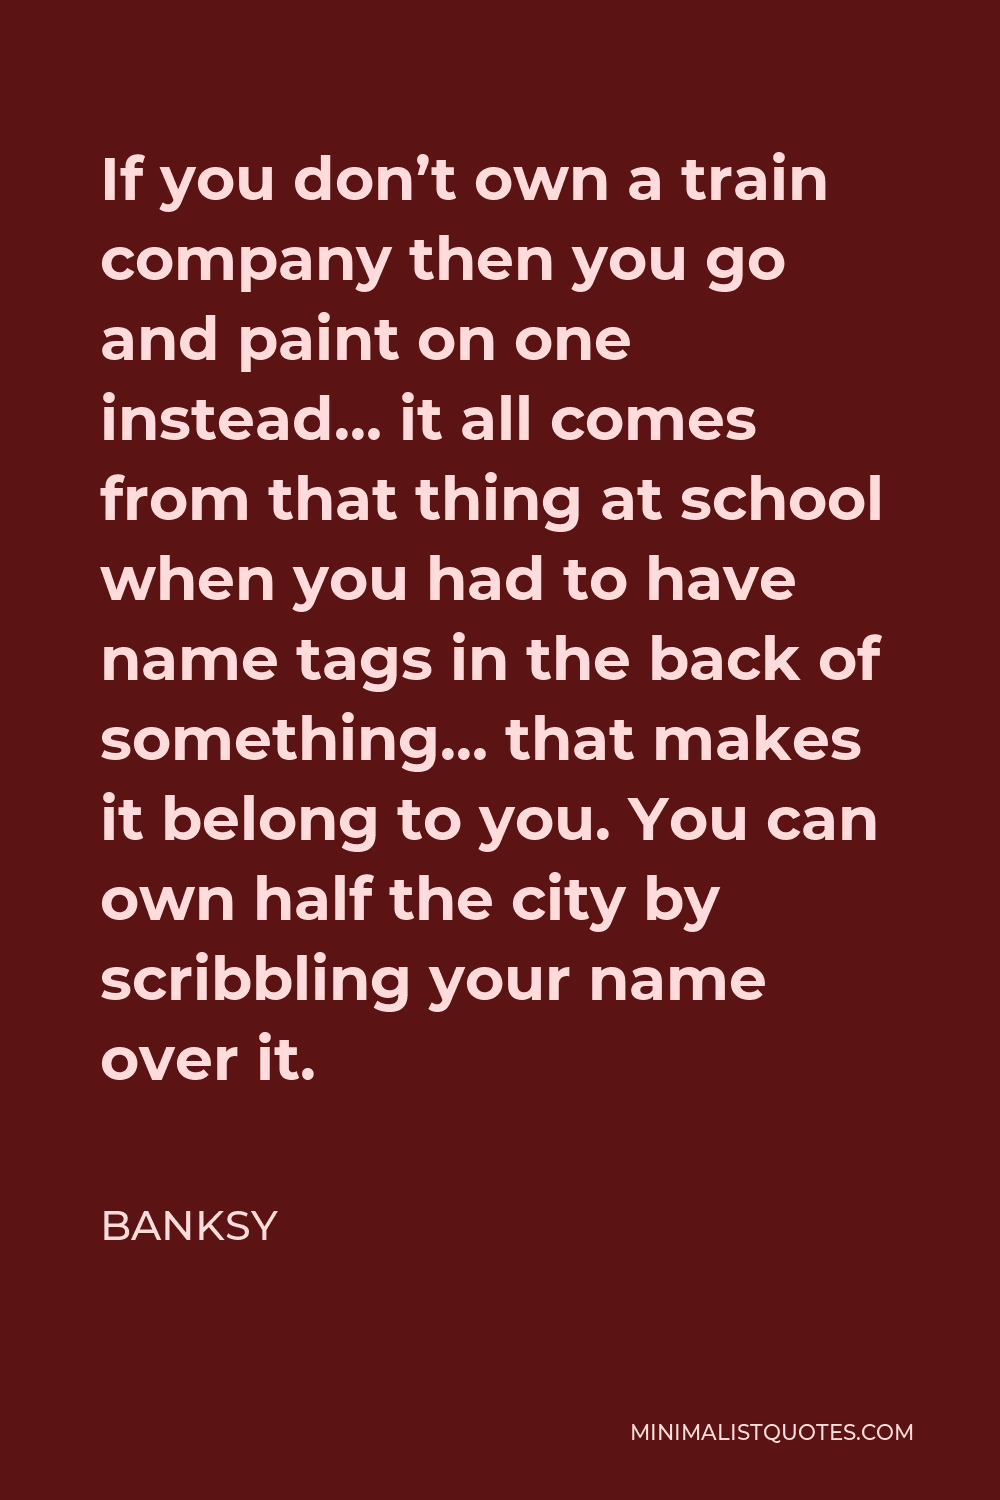 Banksy Quote - If you don’t own a train company then you go and paint on one instead… it all comes from that thing at school when you had to have name tags in the back of something… that makes it belong to you. You can own half the city by scribbling your name over it.